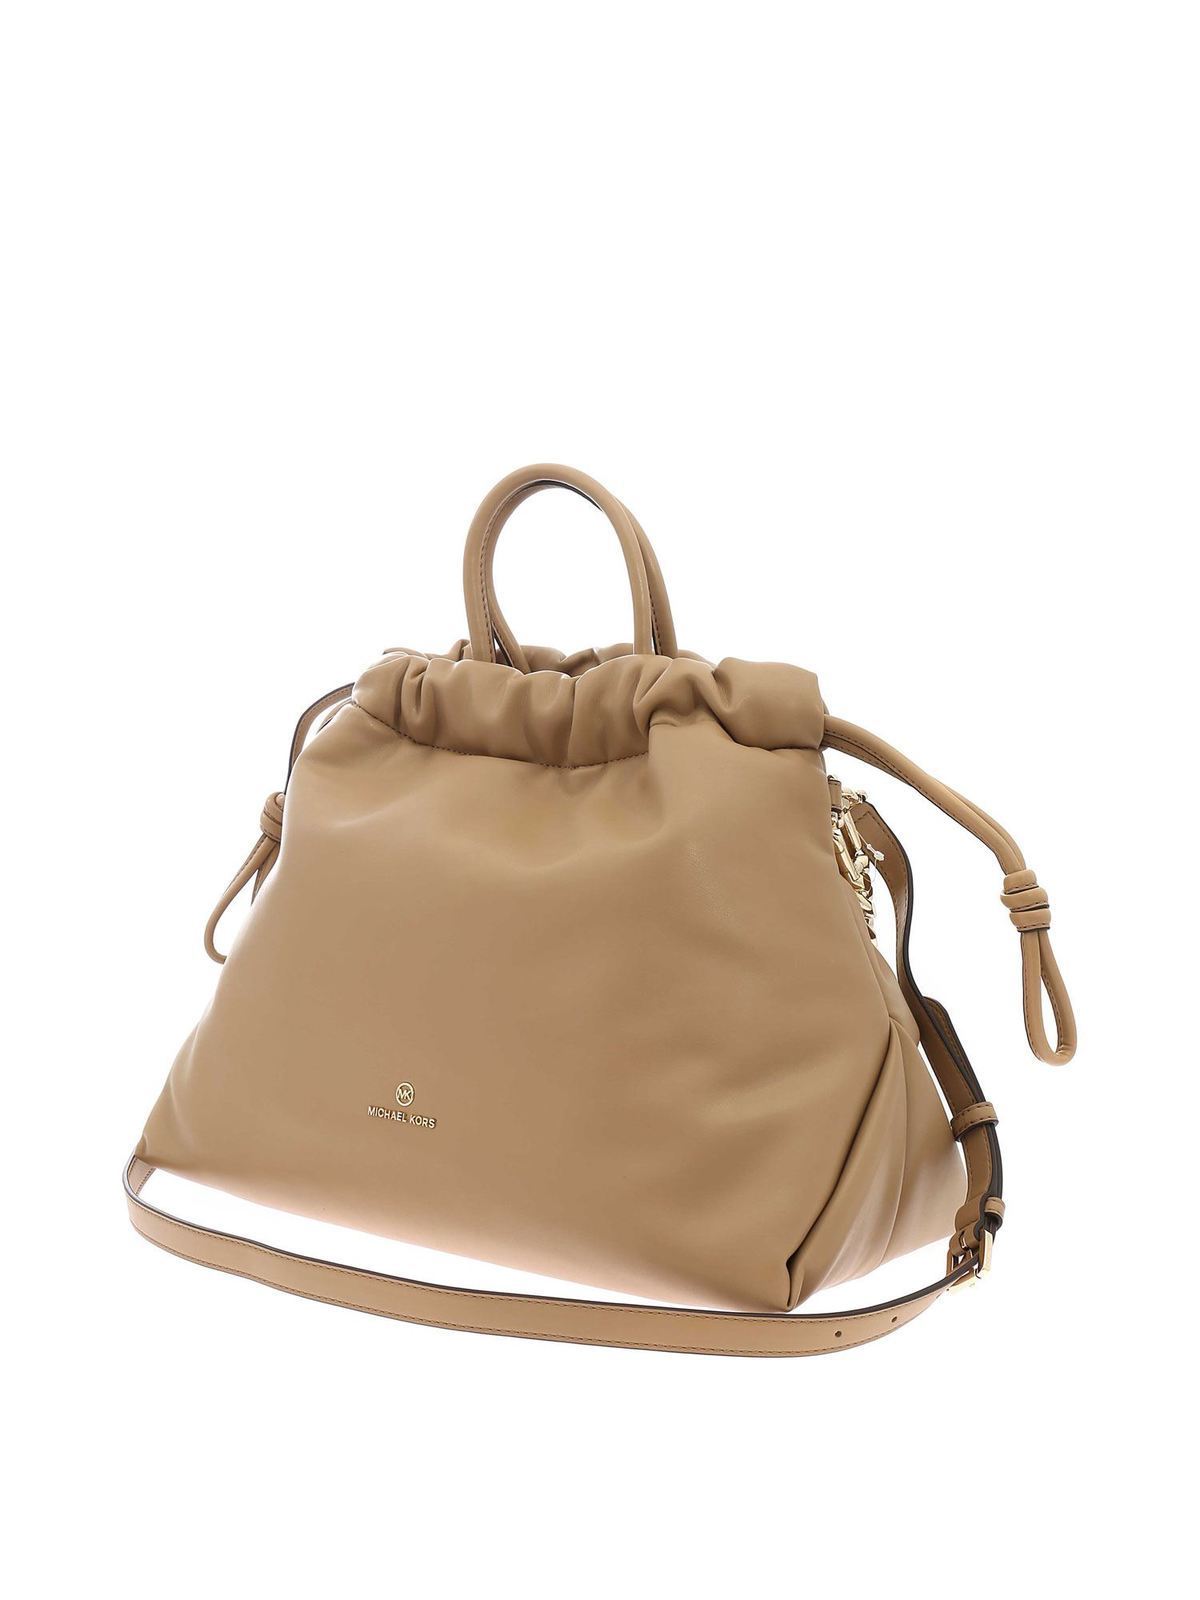 Bimba y Lola Bags, The best prices online in Malaysia